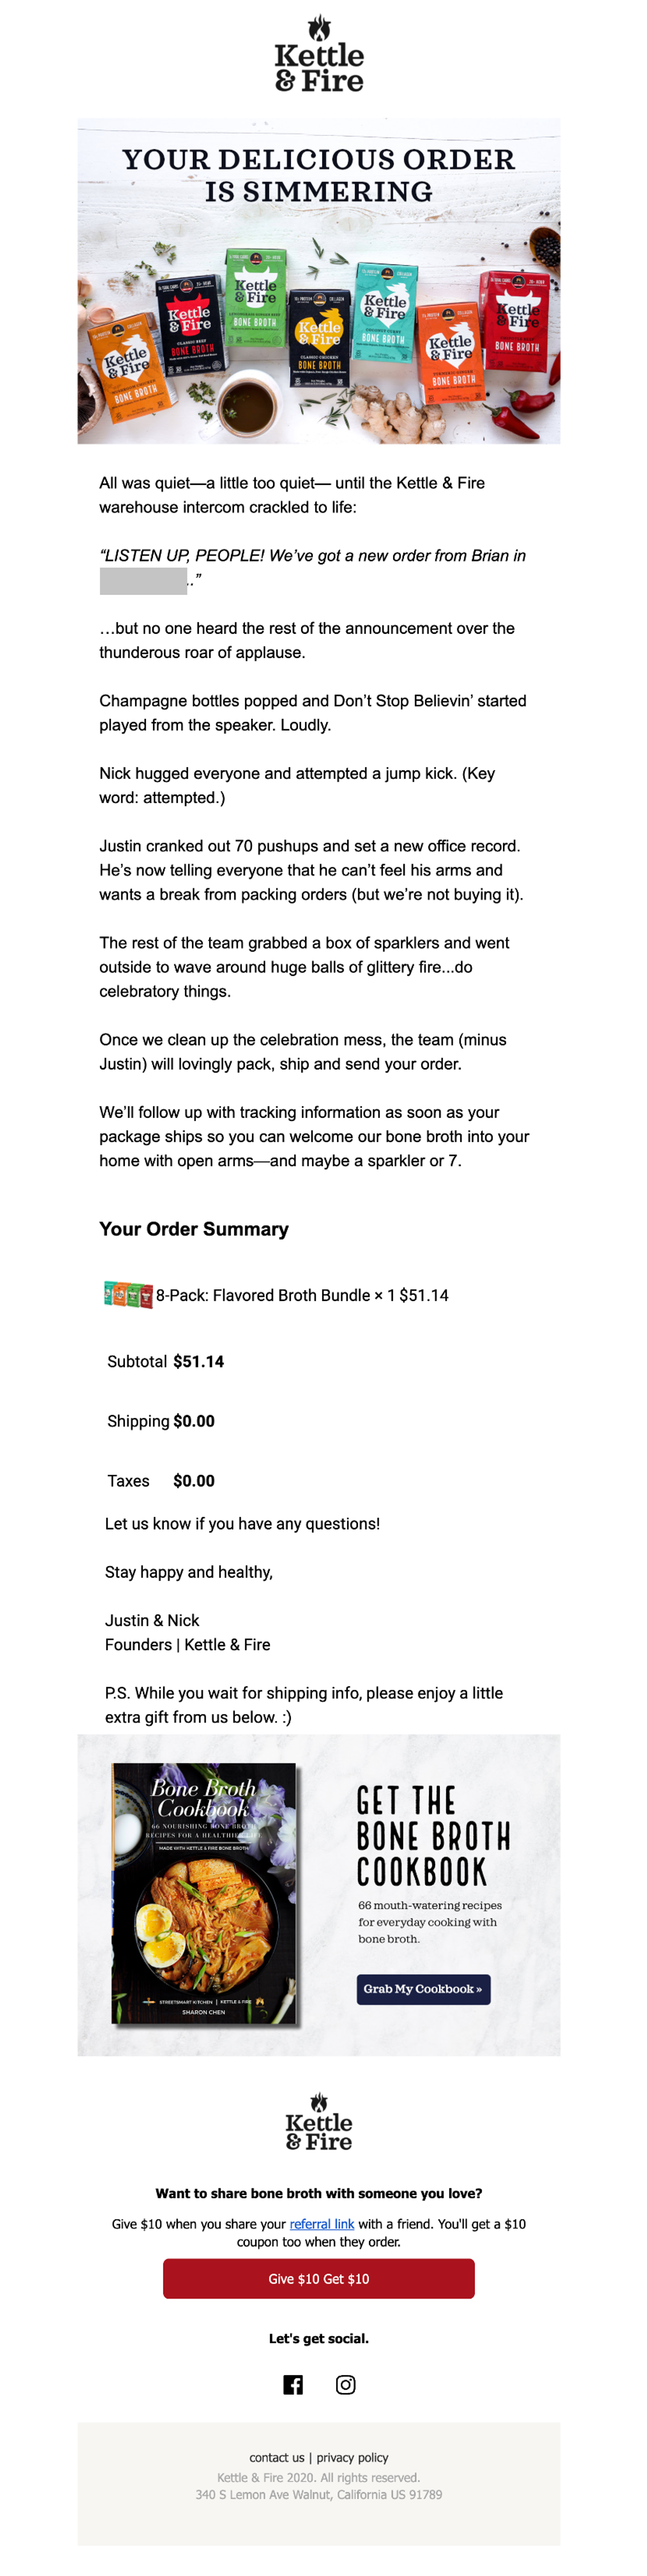 Kettle & Fire Order Confirmation Email Template